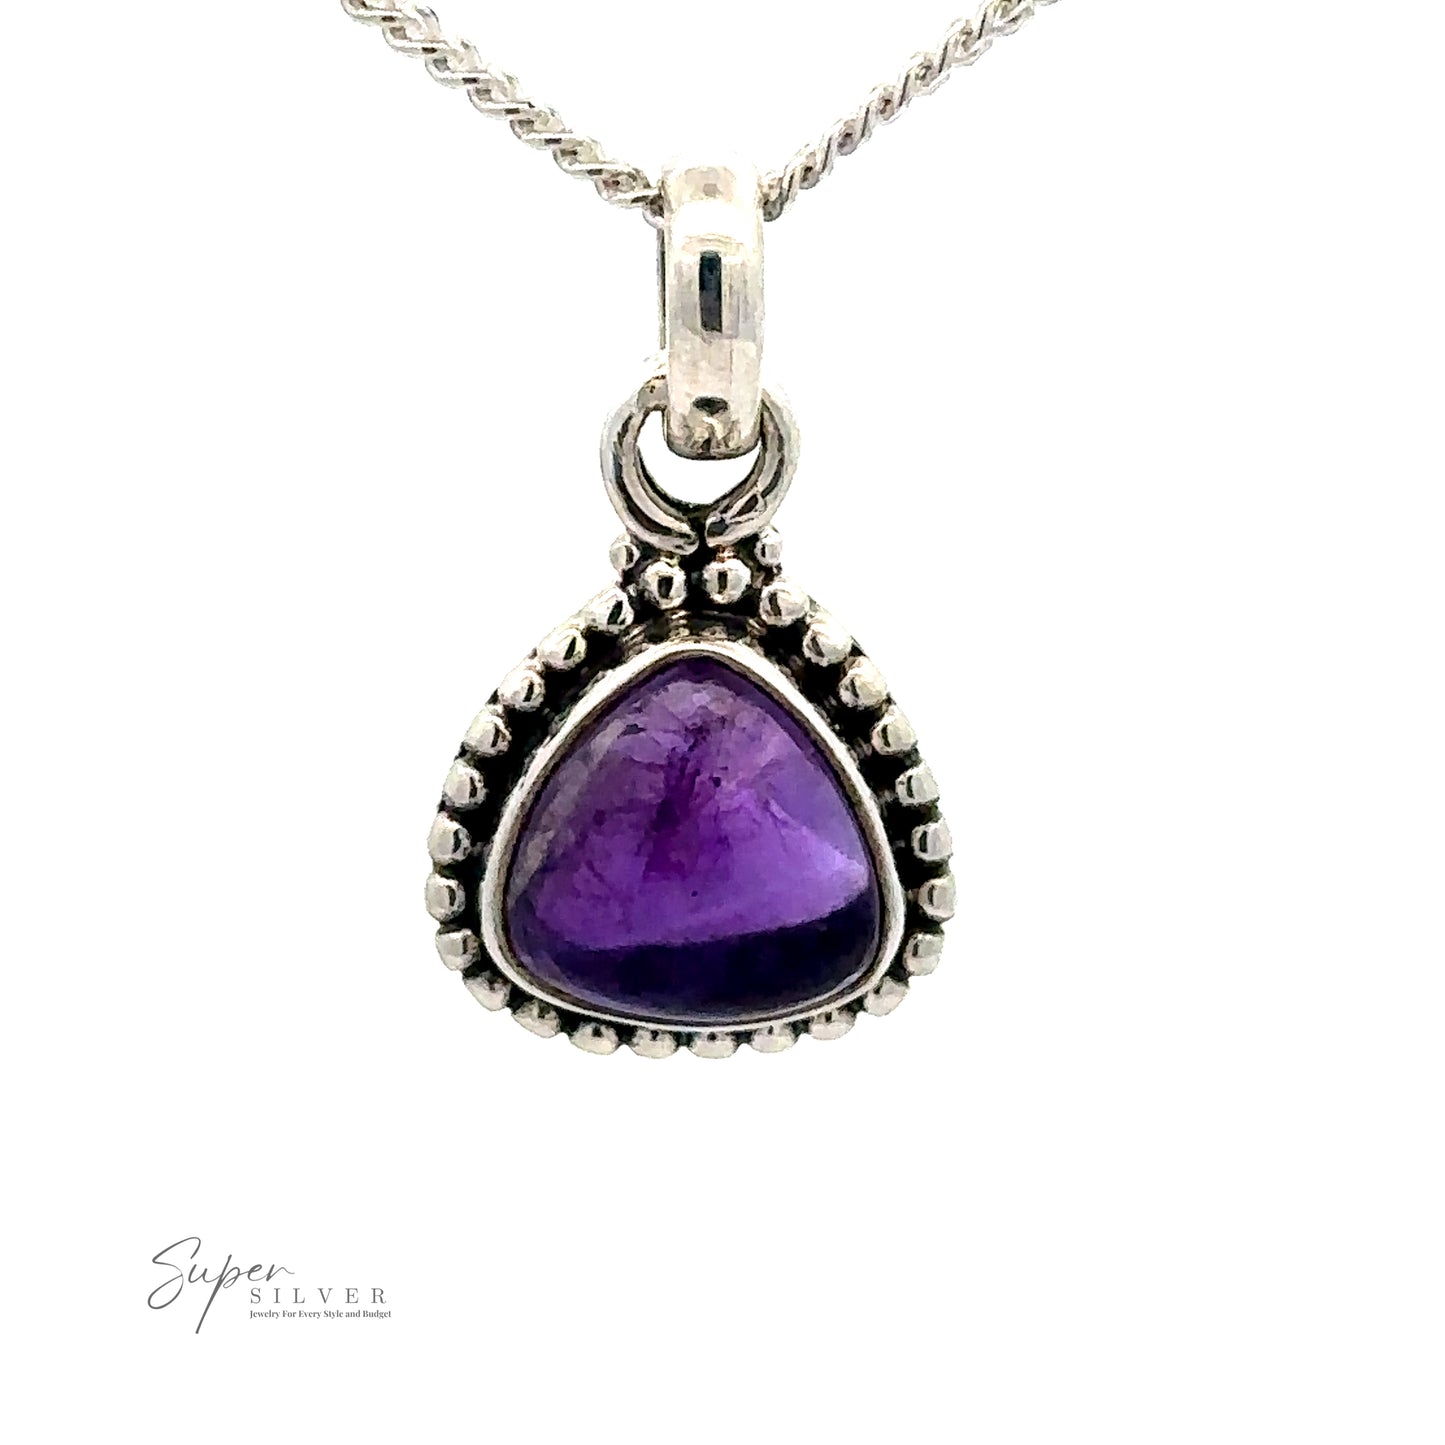 A close-up of a sterling silver necklace pendant featuring a triangular-shaped purple gemstone surrounded by a beaded edge design. The pendant is attached to a twisted chain. The text "Beautiful Triangular Shape Stone Pendant With Beaded Design" is in the bottom left corner.